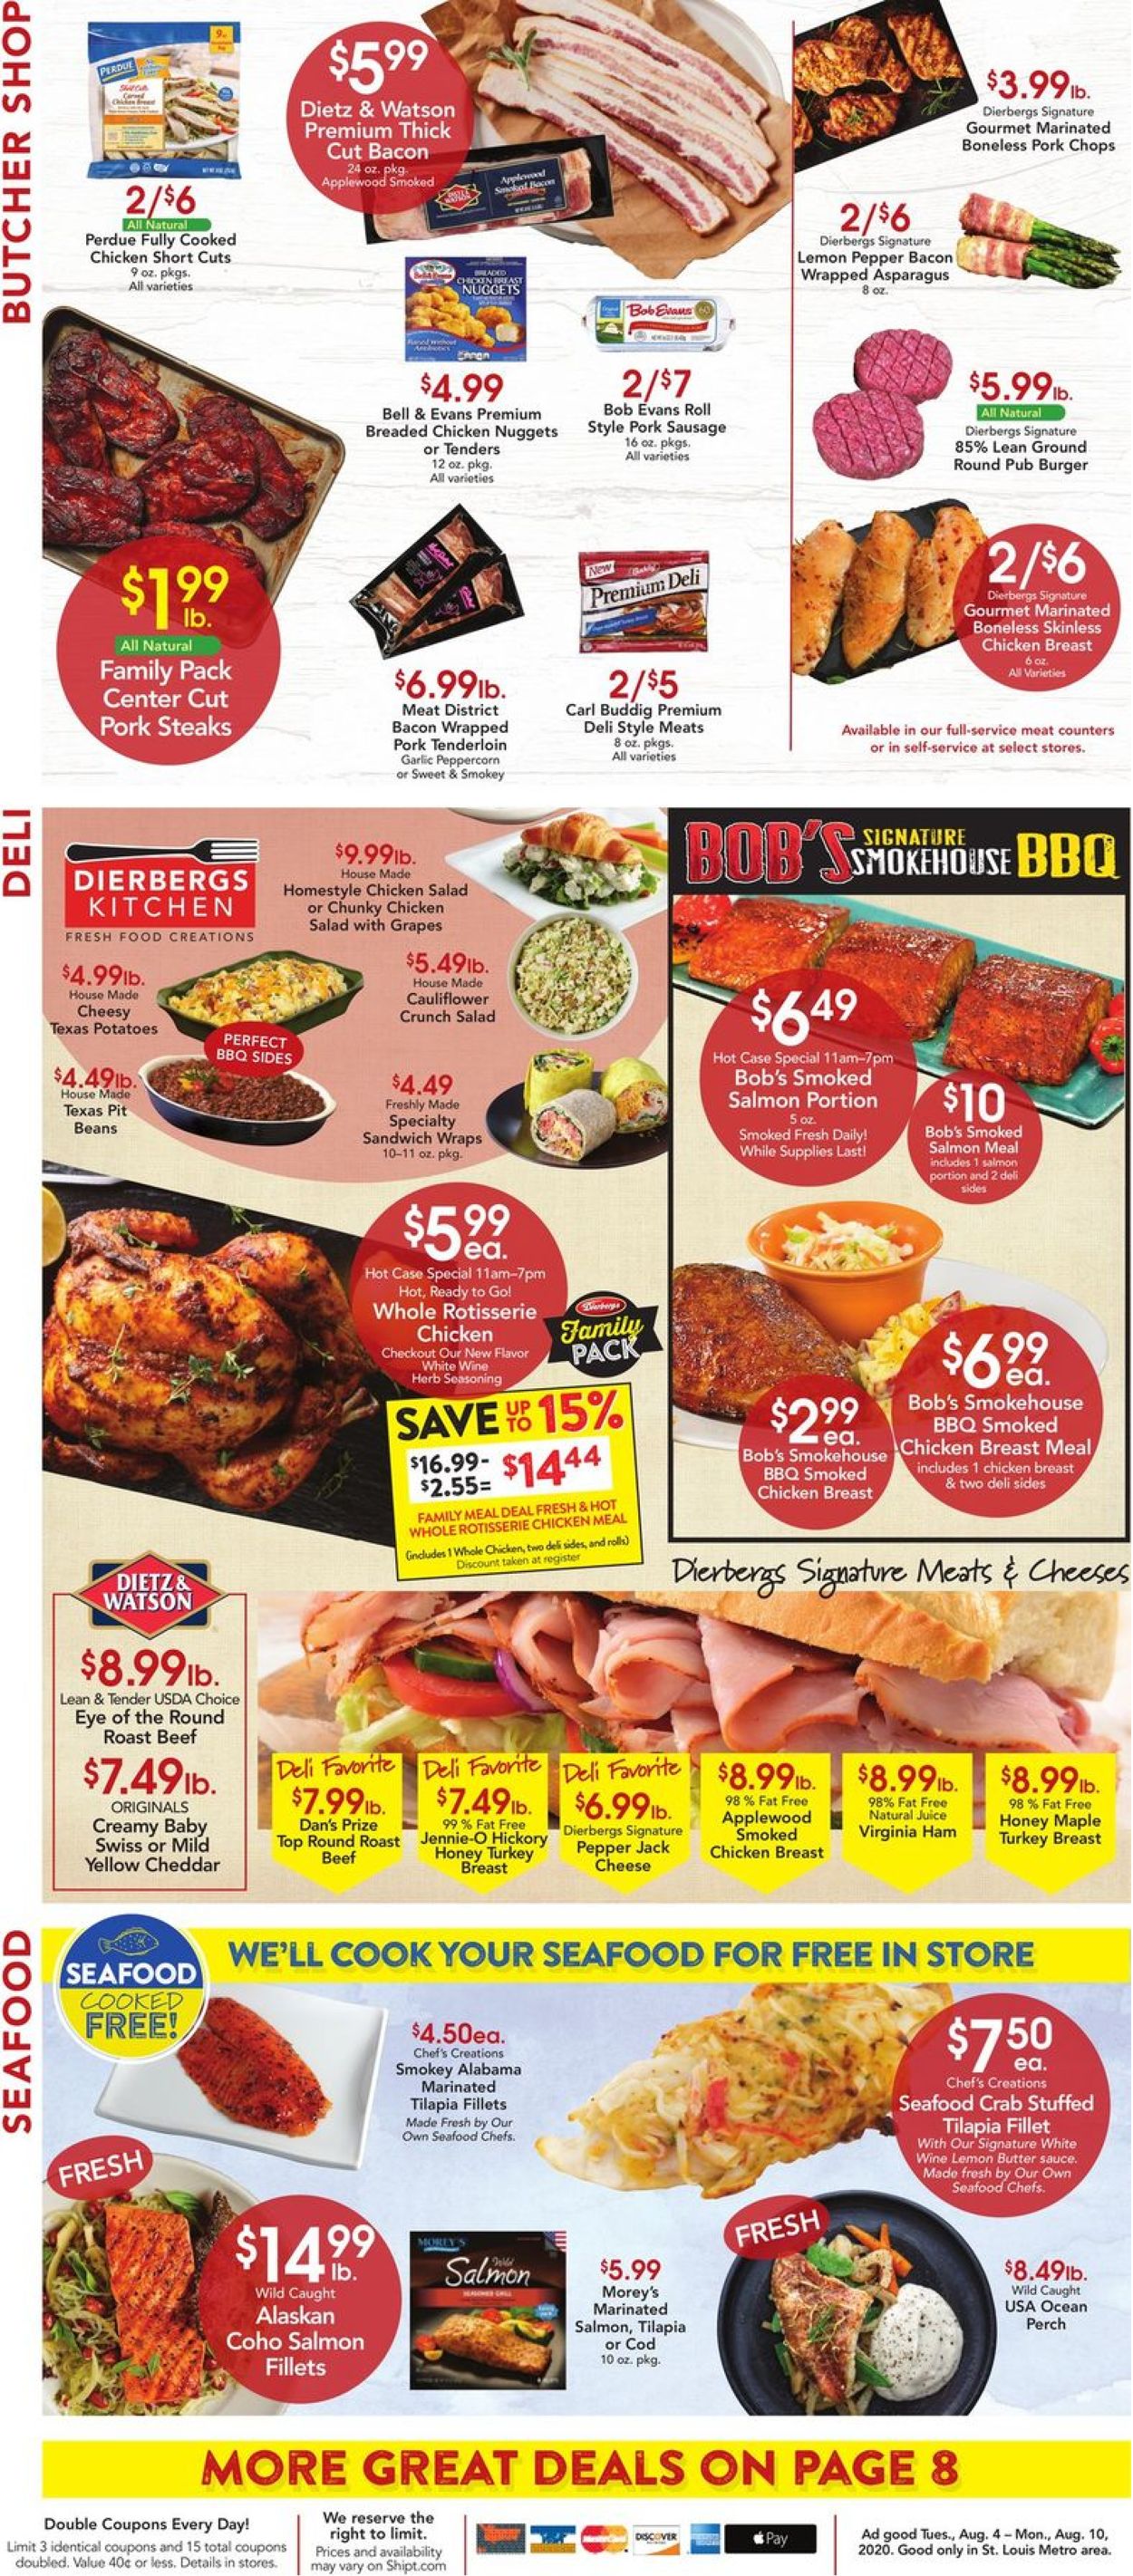 Dierbergs Ad from 08/04/2020